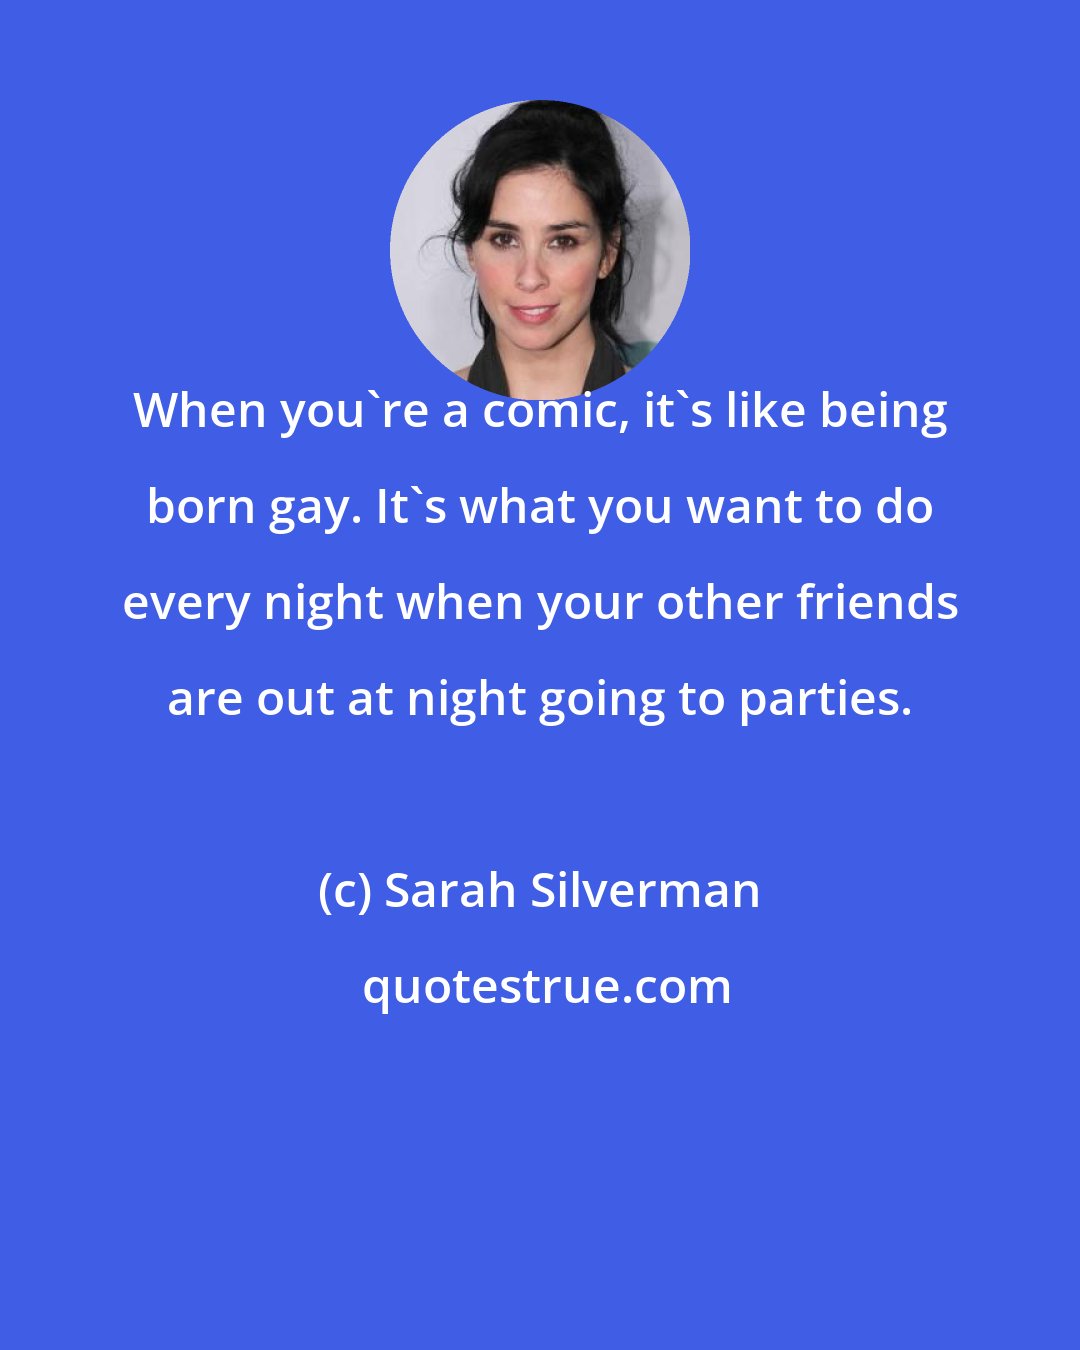 Sarah Silverman: When you're a comic, it's like being born gay. It's what you want to do every night when your other friends are out at night going to parties.